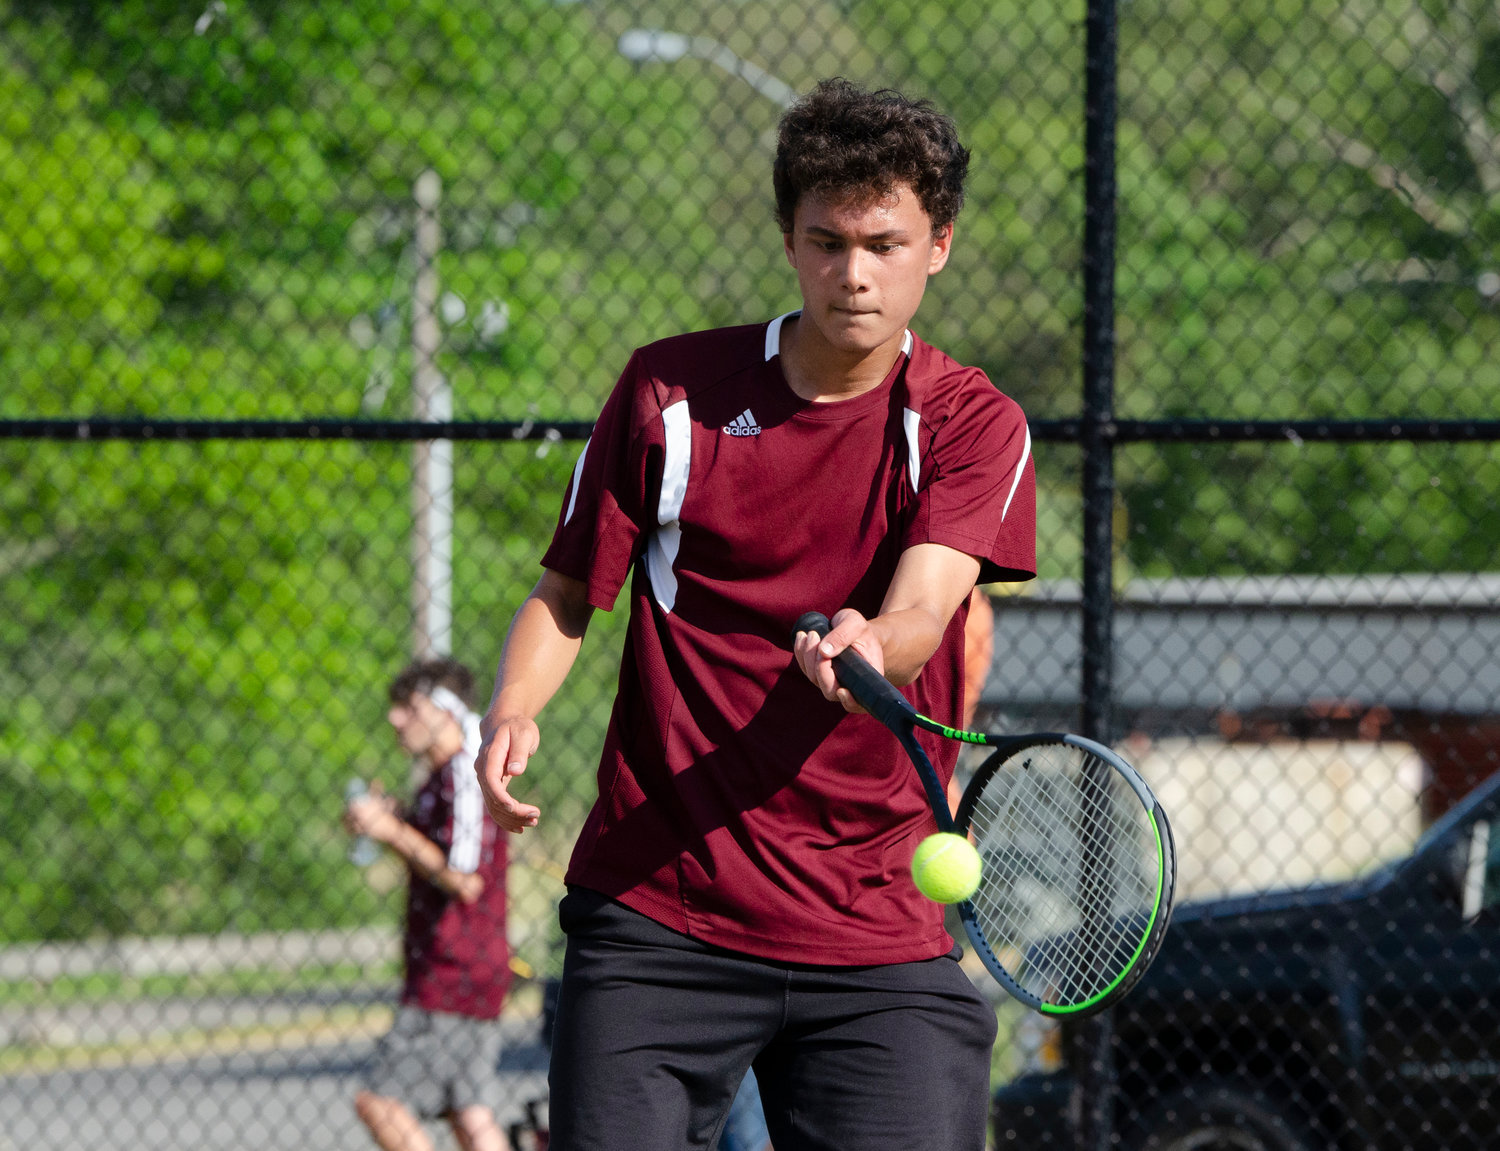 Fourth singles player Aaron DeGala beat Falcons' Jarred Angel, 6-1, 6-0, during their match on Monday night.